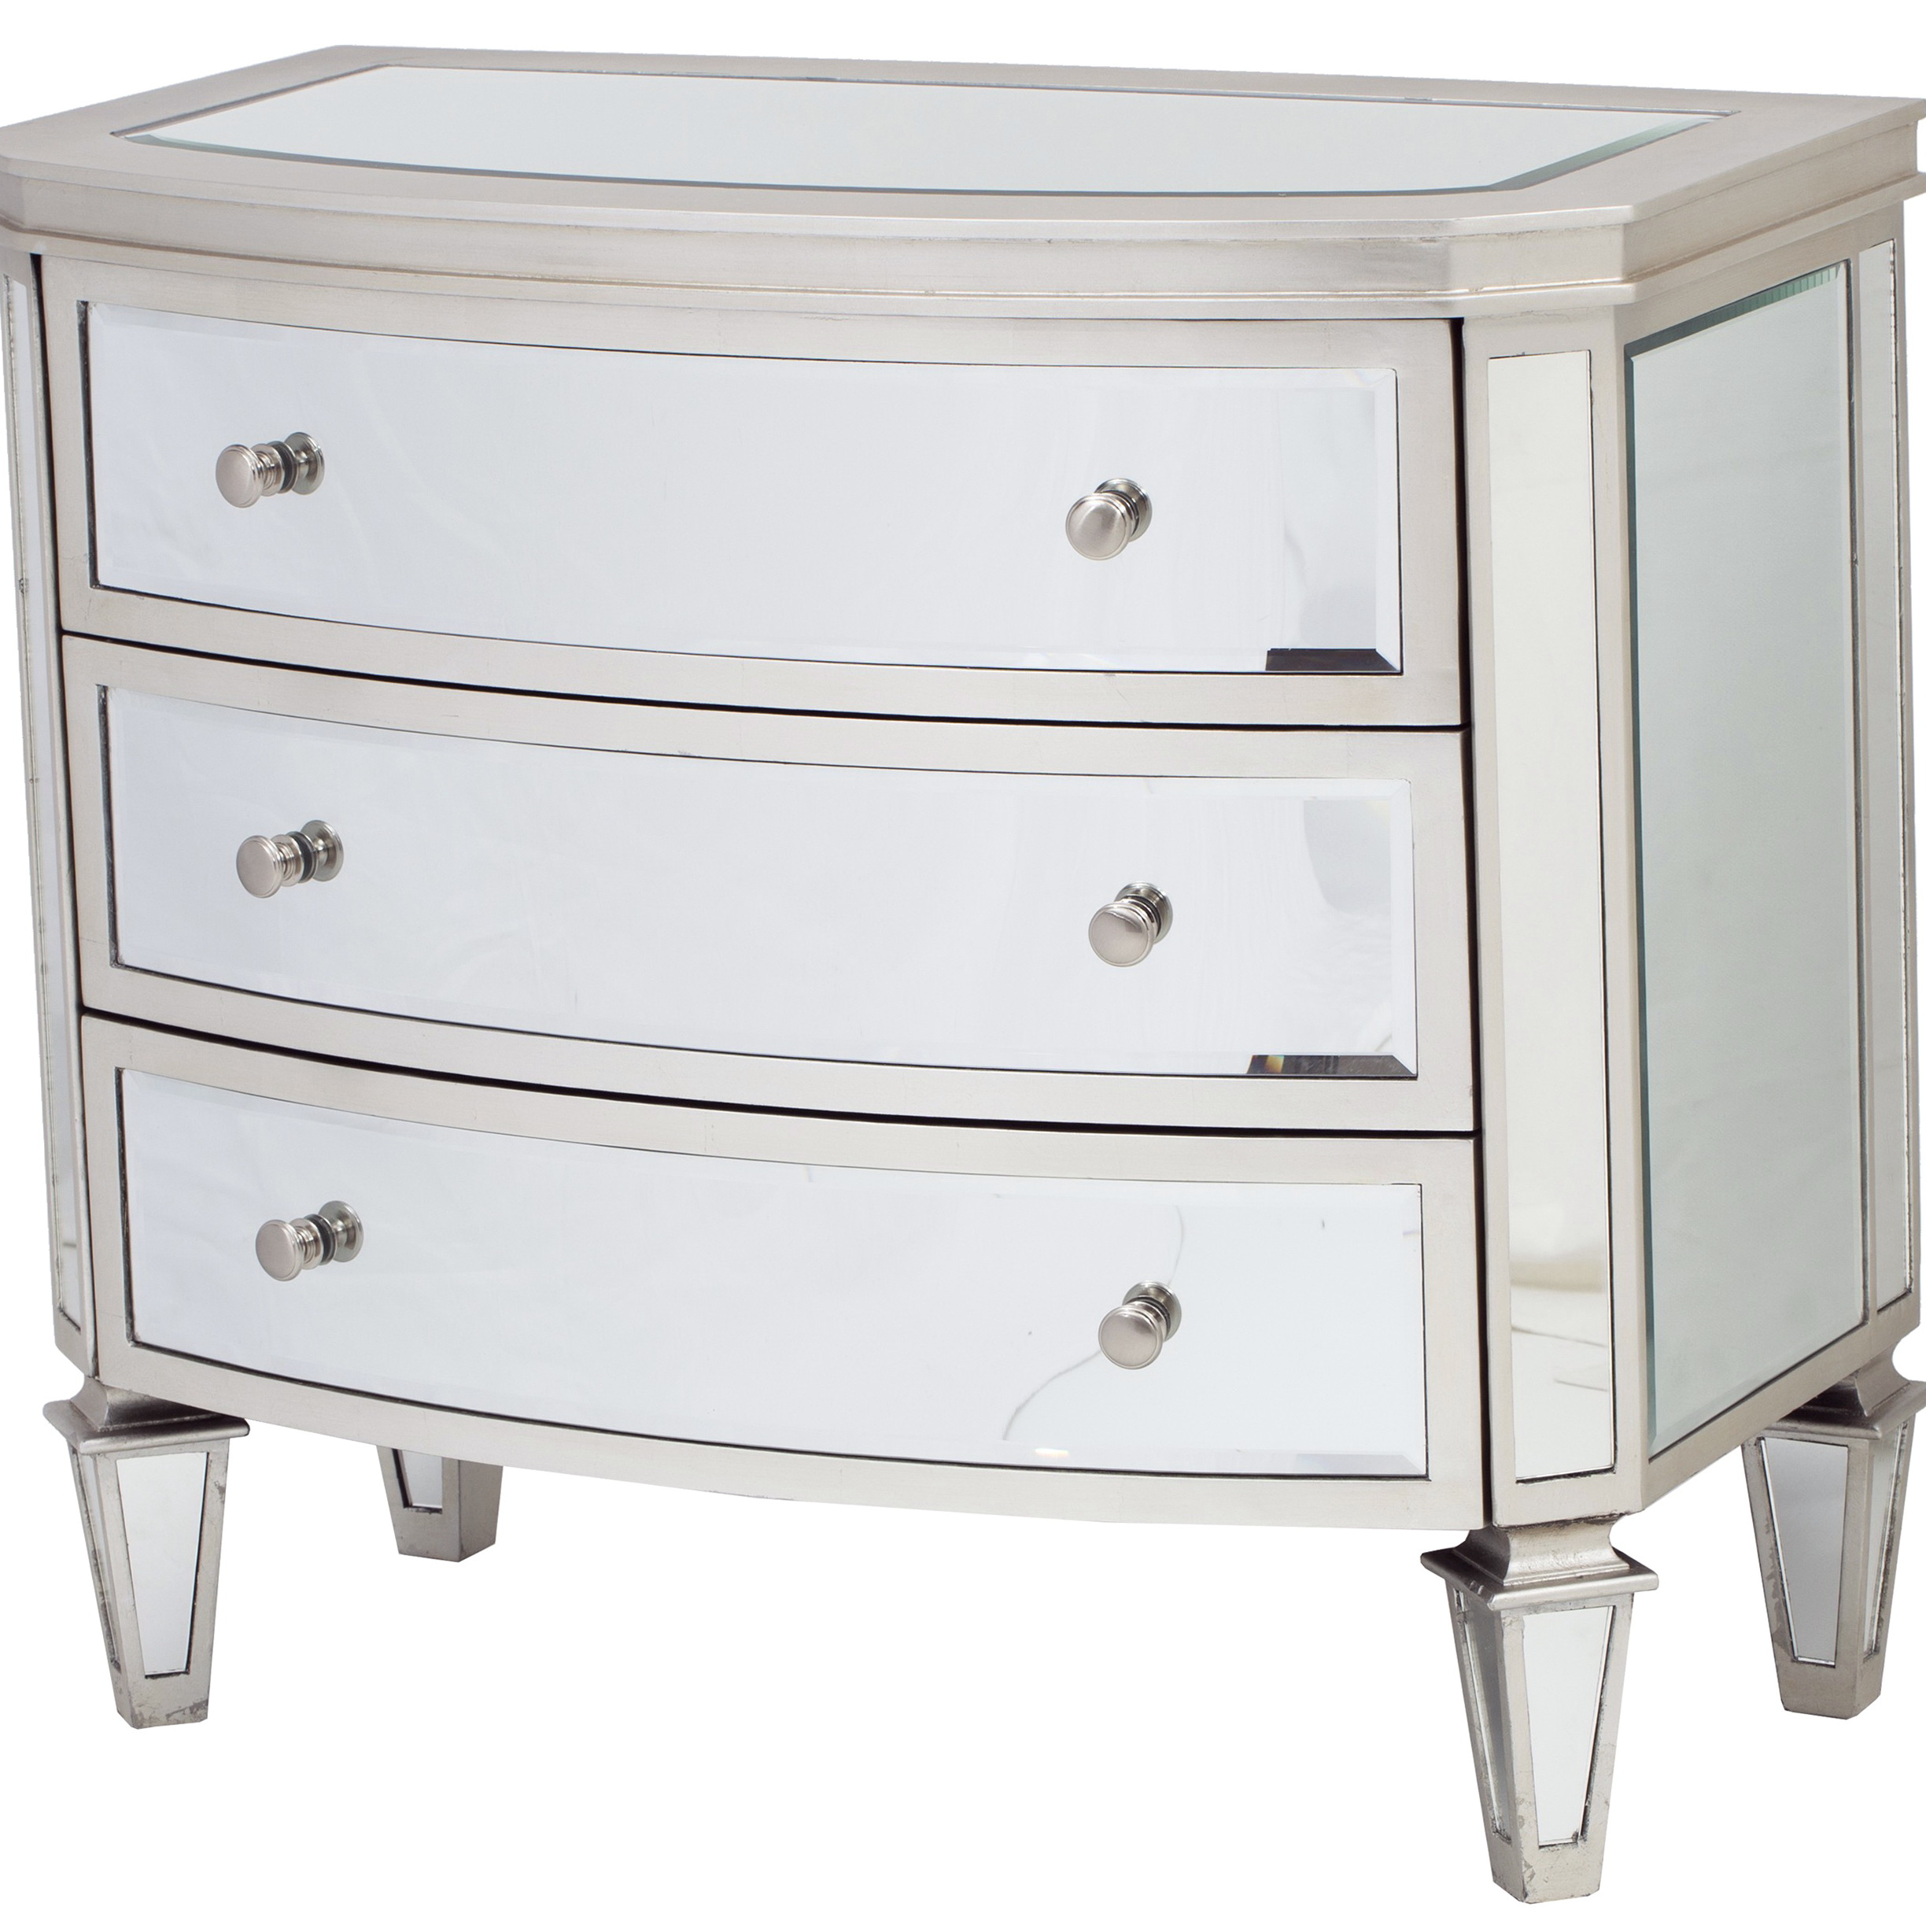 ultimate mirrored chest nightstand diy nightstands ikea hack colossal drawers silver glass accent table with drawer americapadvisers black panther badcock bedroom sets wood and